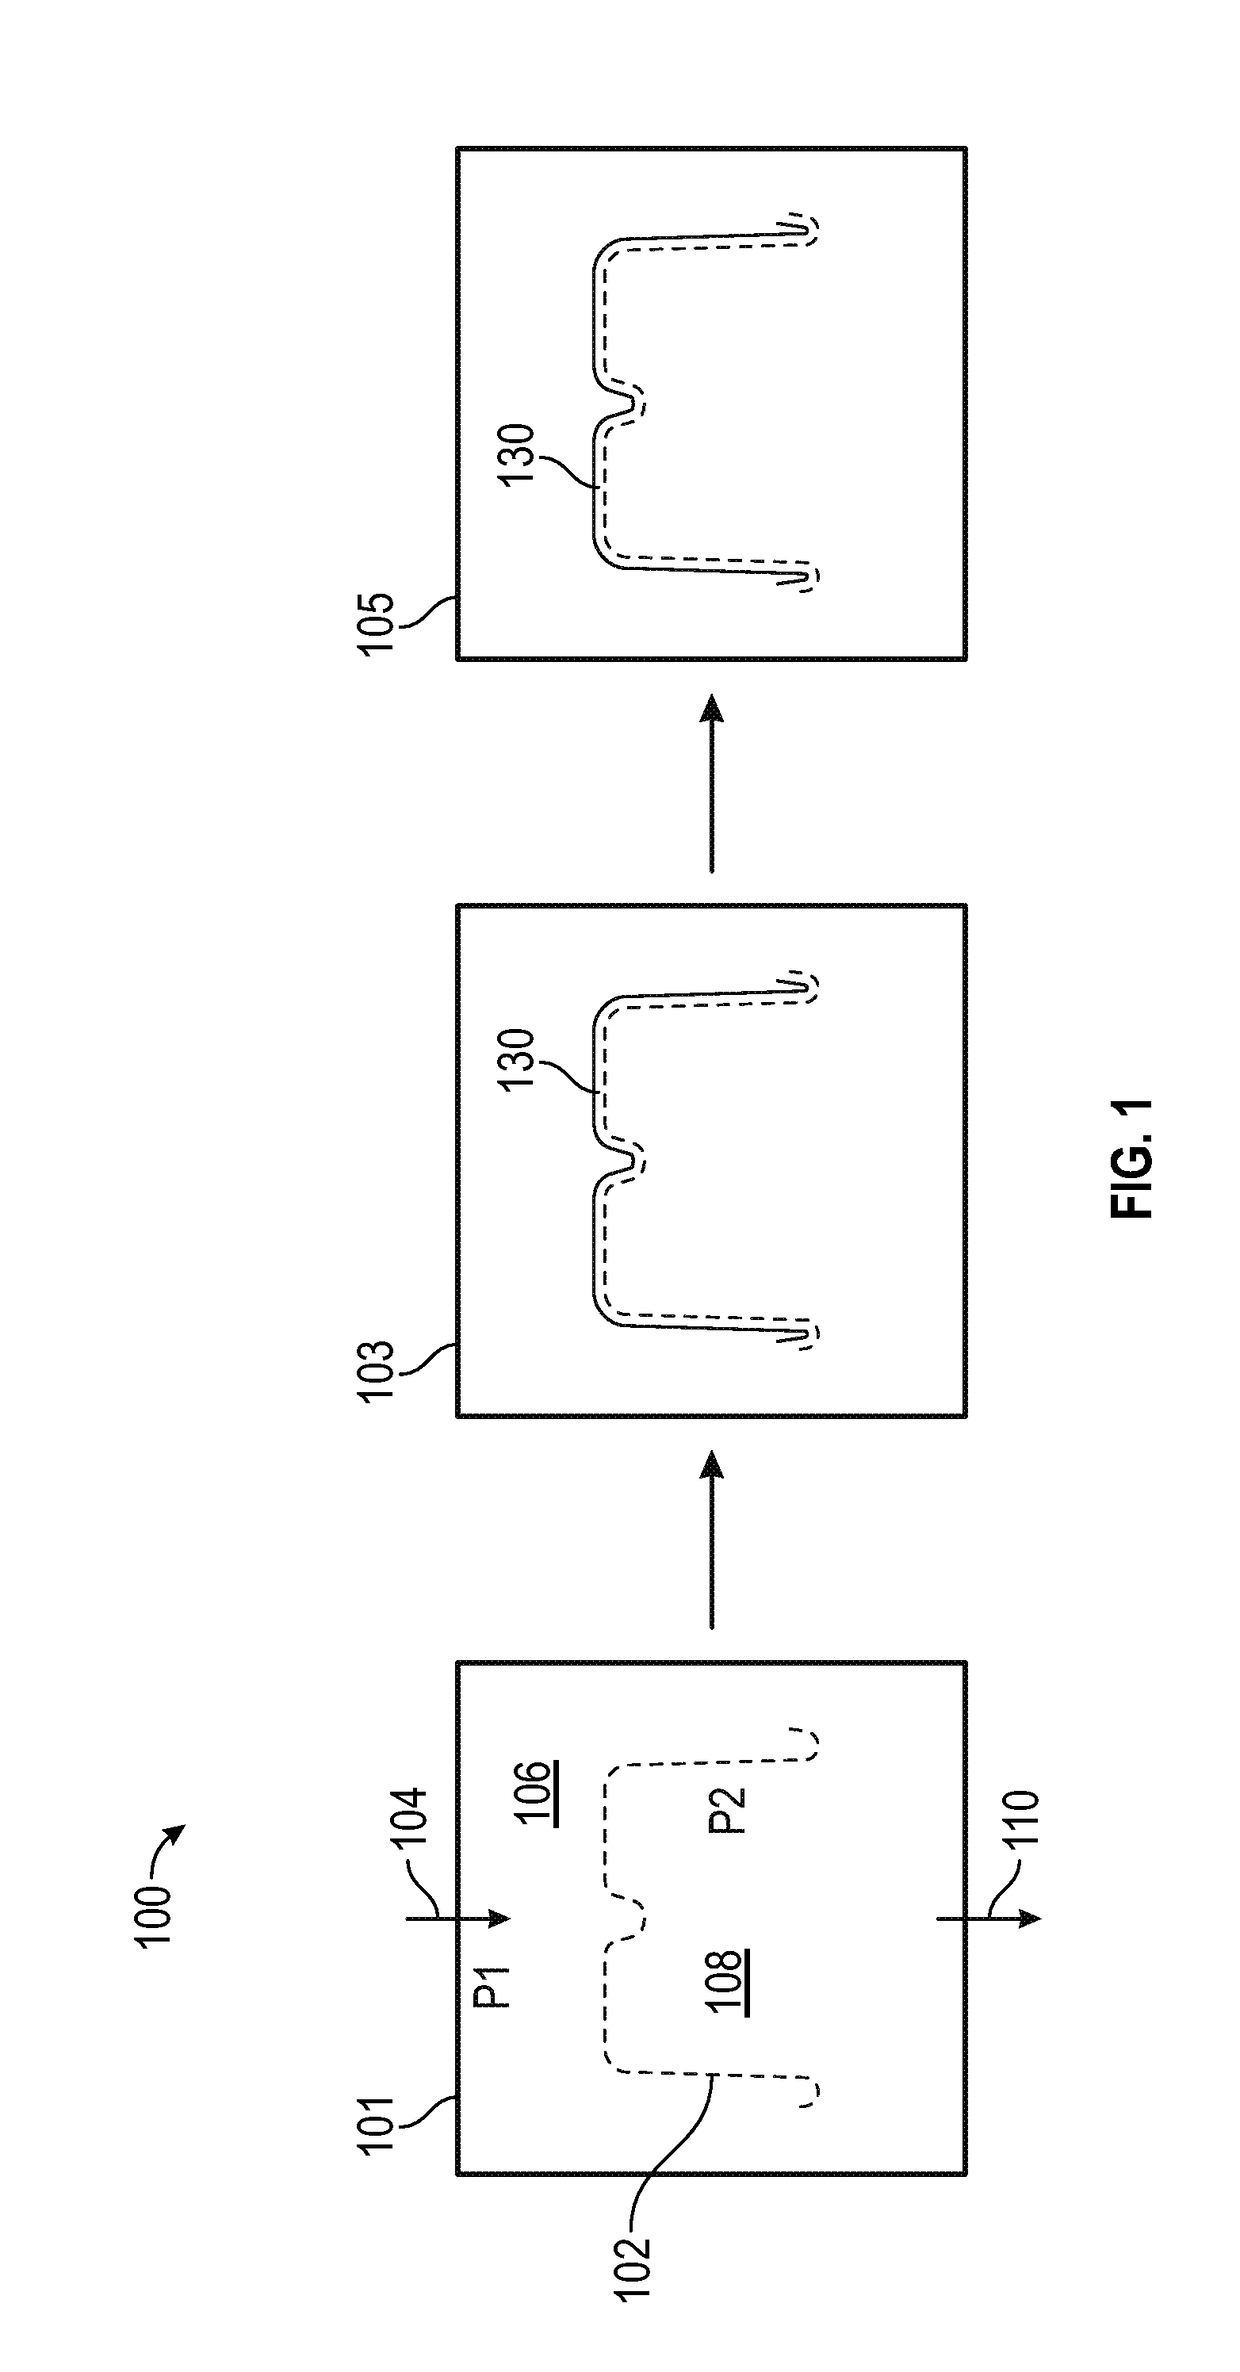 Methods and Apparatus For Manufacturing Fiber-Based Produce Containers